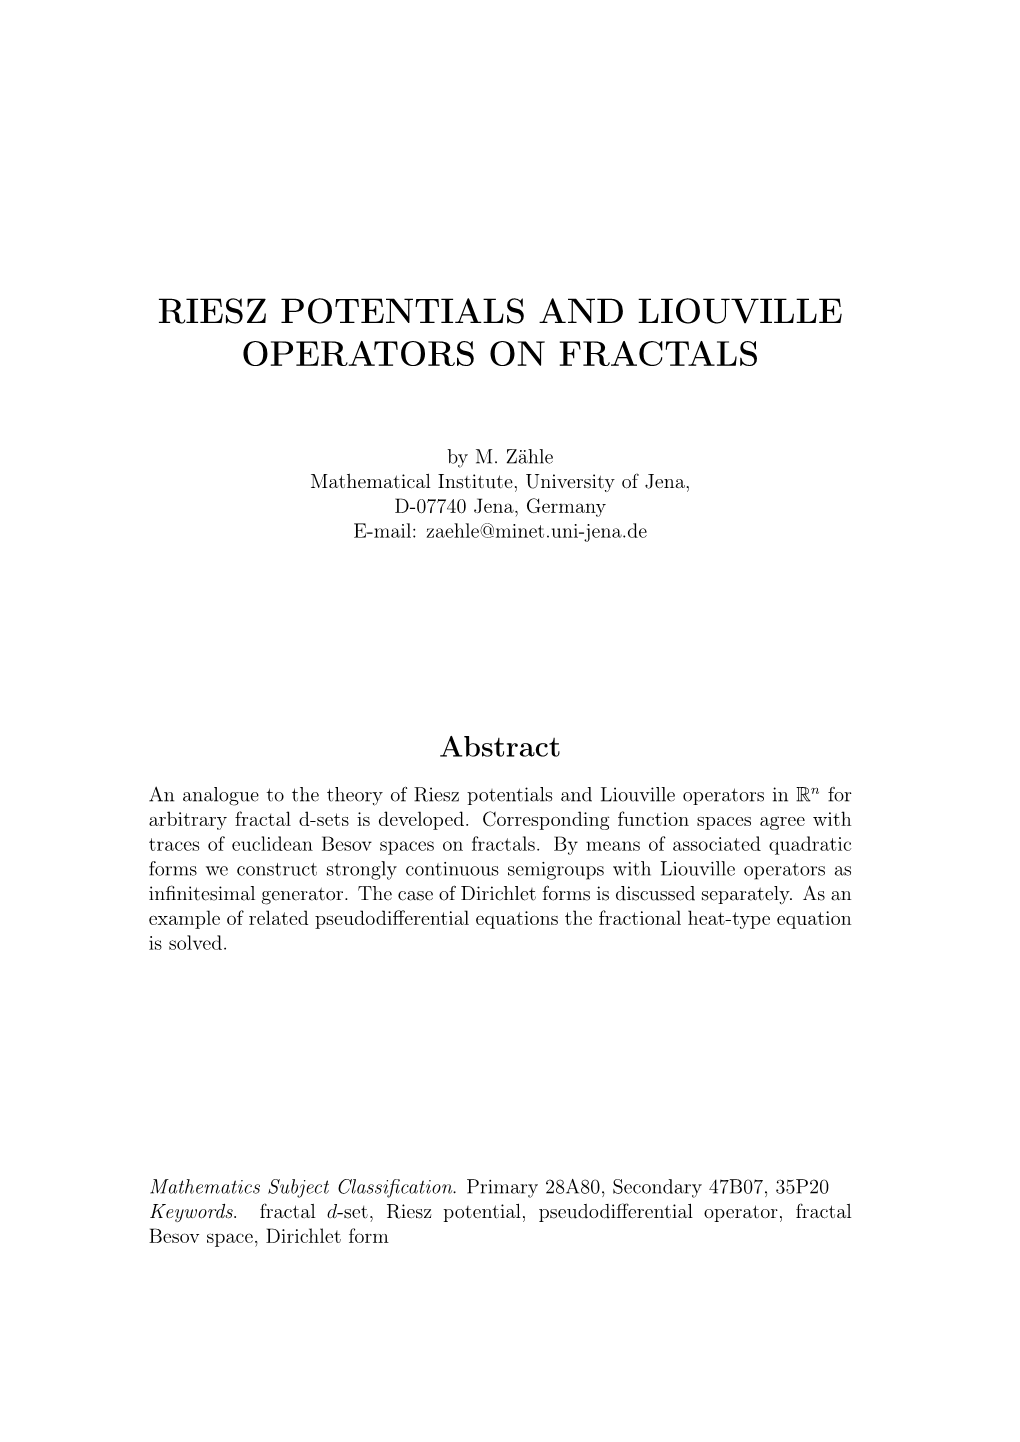 Riesz Potentials and Liouville Operators on Fractals